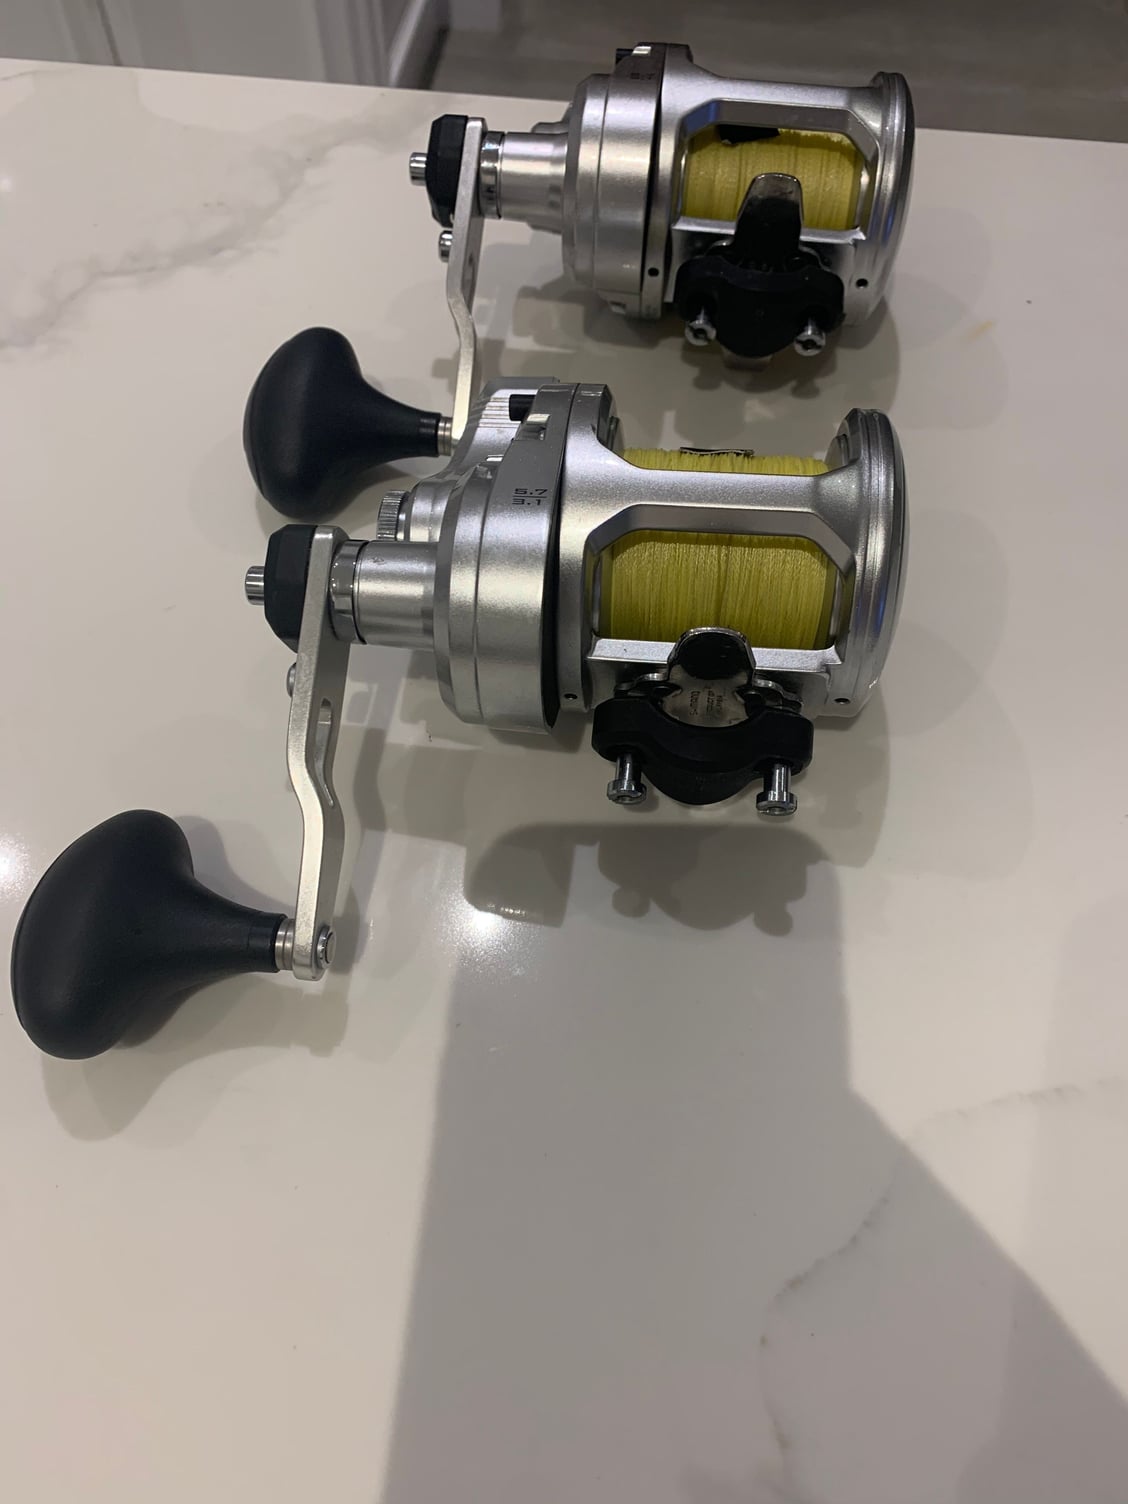 Shimano's New Speedmaster? - Page 5 - The Hull Truth - Boating and Fishing  Forum